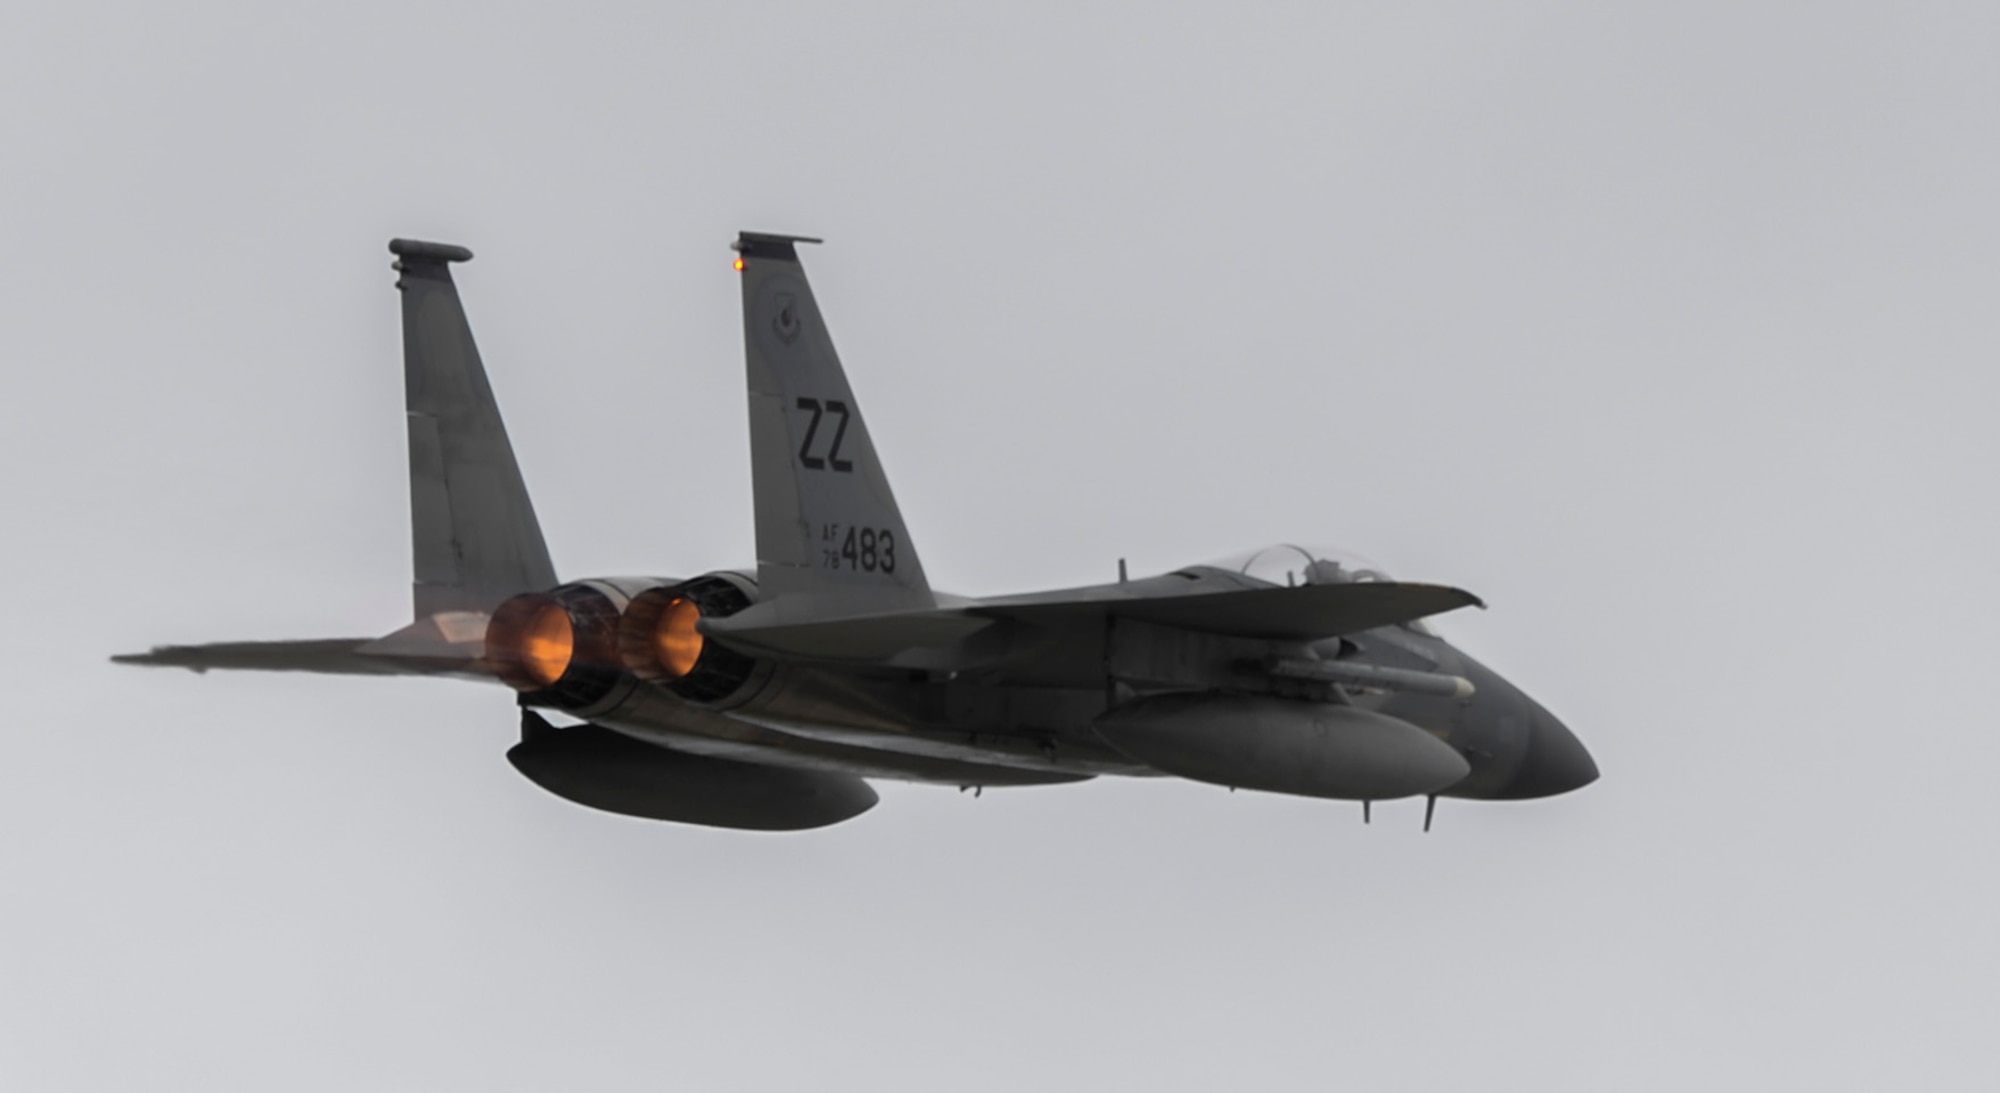 A U.S. Air Force F-15 Eagle assigned to the 44th Fighter Squadron, Kadena Air Base, Japan, takes off during Exercise Valiant Shield at Andersen Andersen AFB, Guam, Sept. 14, 2016. Valiant Shield is a biennial U.S. Air Force, Navy and Marine Corps exercise held in Guam, focusing on real-world proficiency in sustaining joint forces at sea, in the air, on land and in cyberspace. (U.S. Air Force photo by Tech. Sgt. Richard P. Ebensberger)